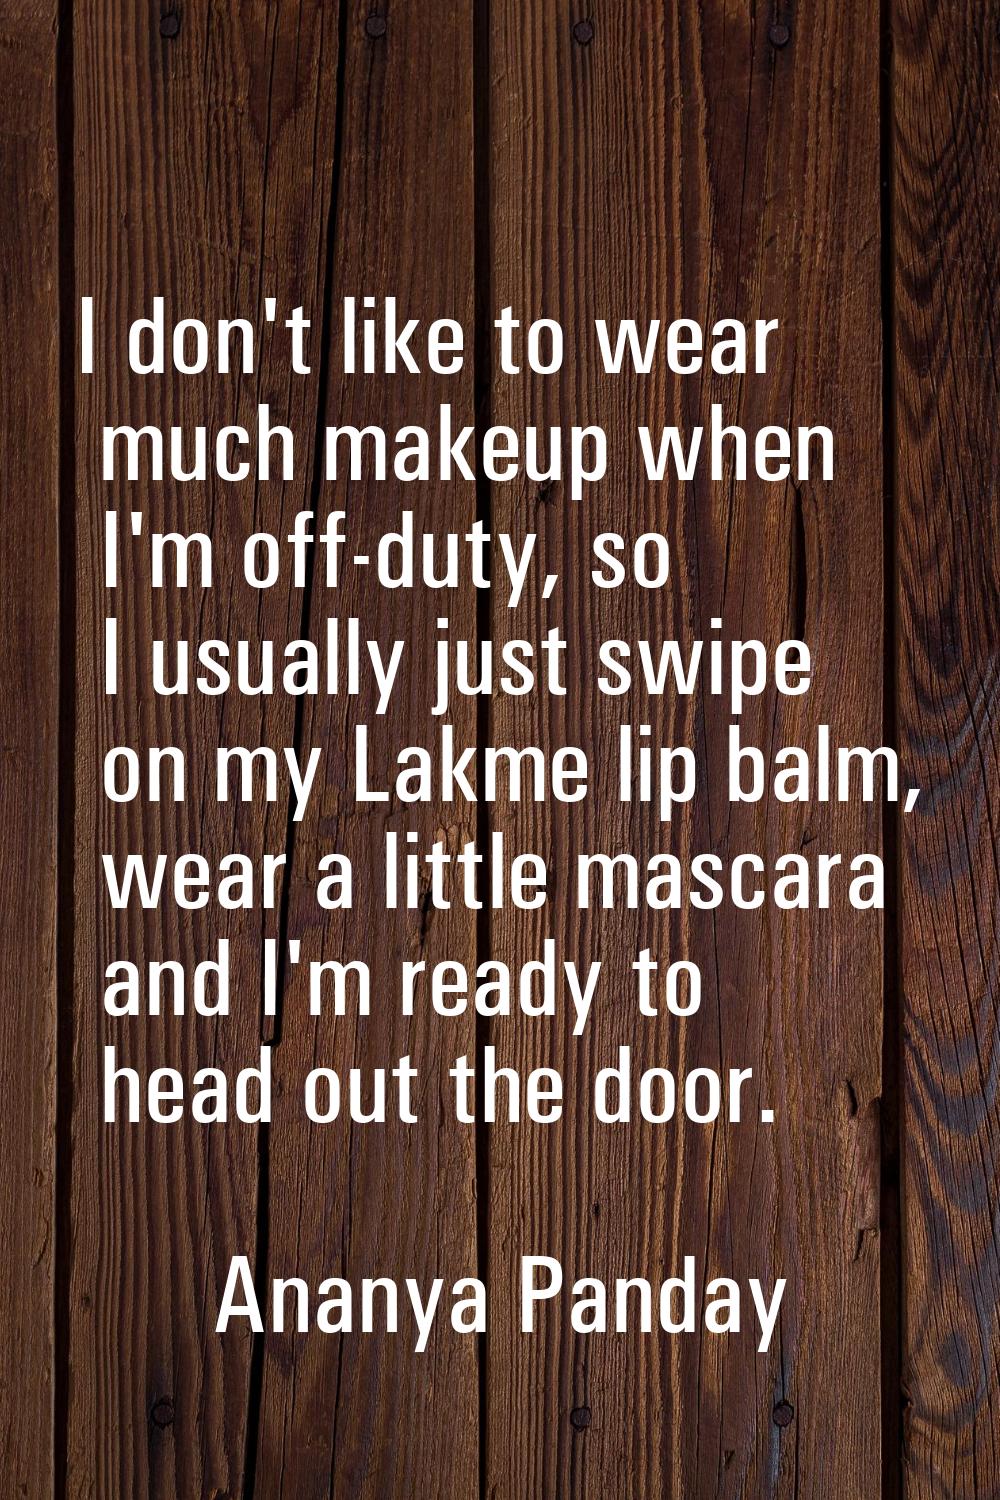 I don't like to wear much makeup when I'm off-duty, so I usually just swipe on my Lakme lip balm, w